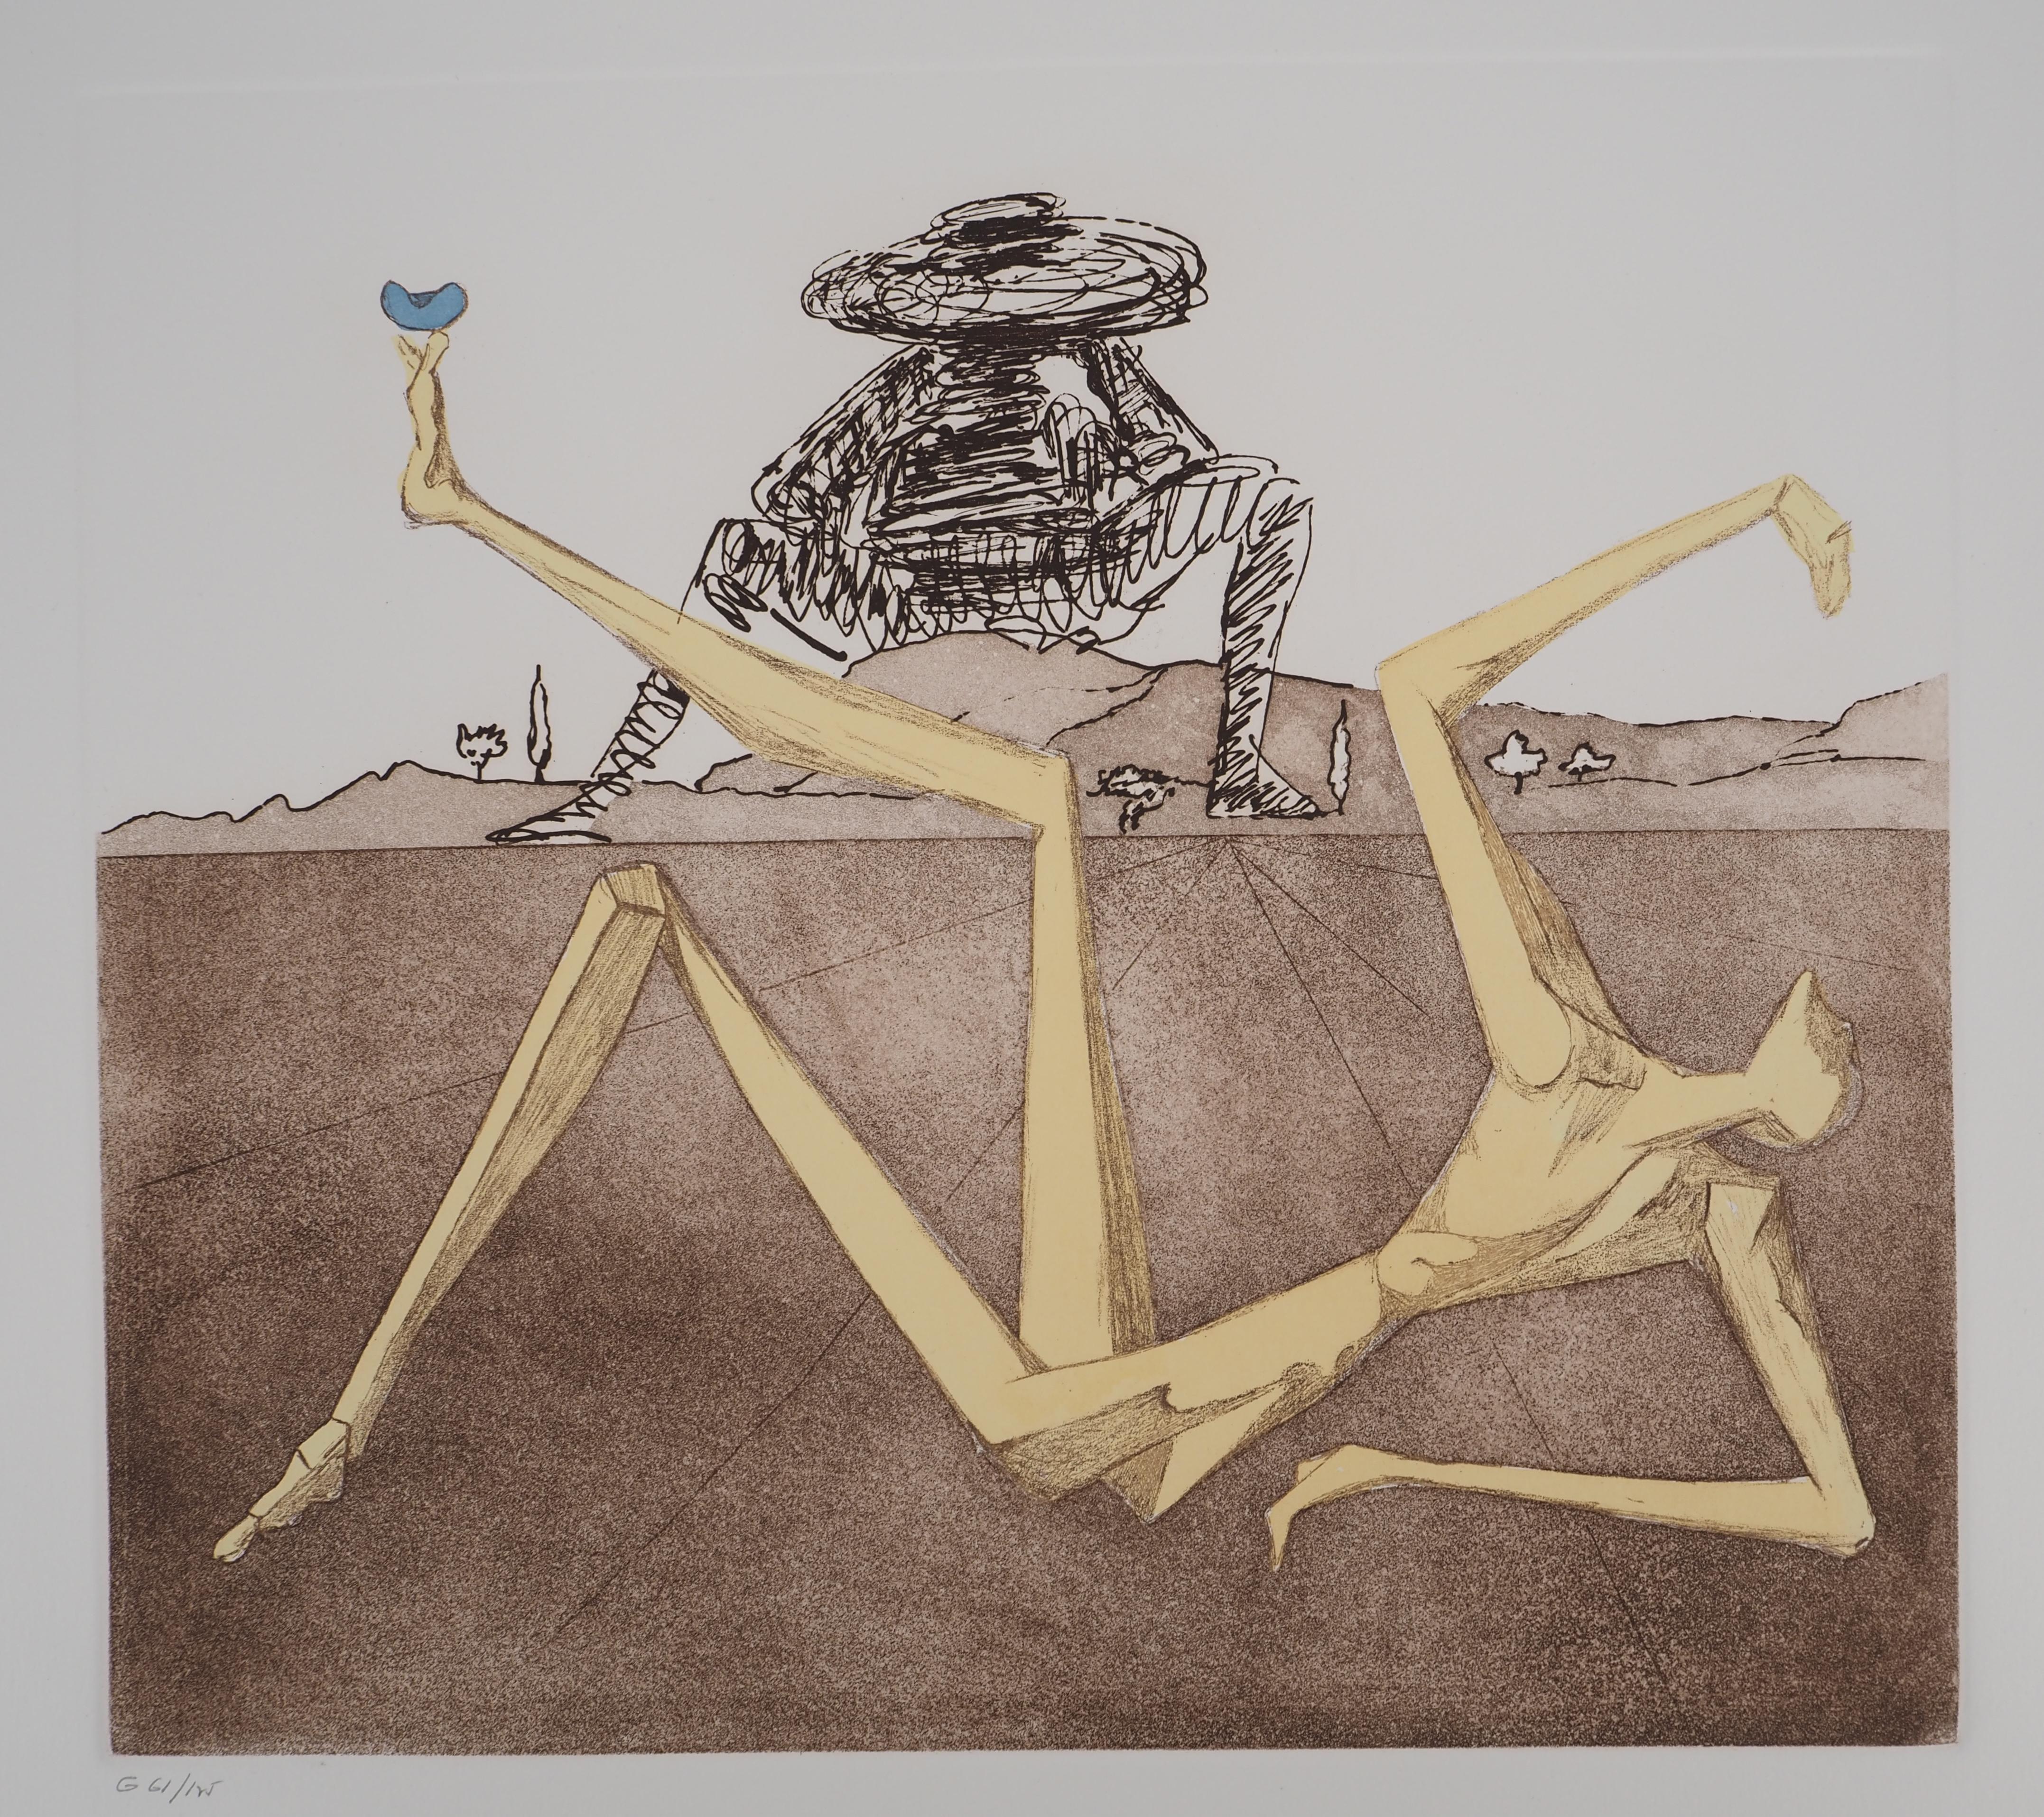 Don Quijote : The Heart of Madness - Original etching, Handsigned (Field #80-1J) - Print by Salvador Dalí